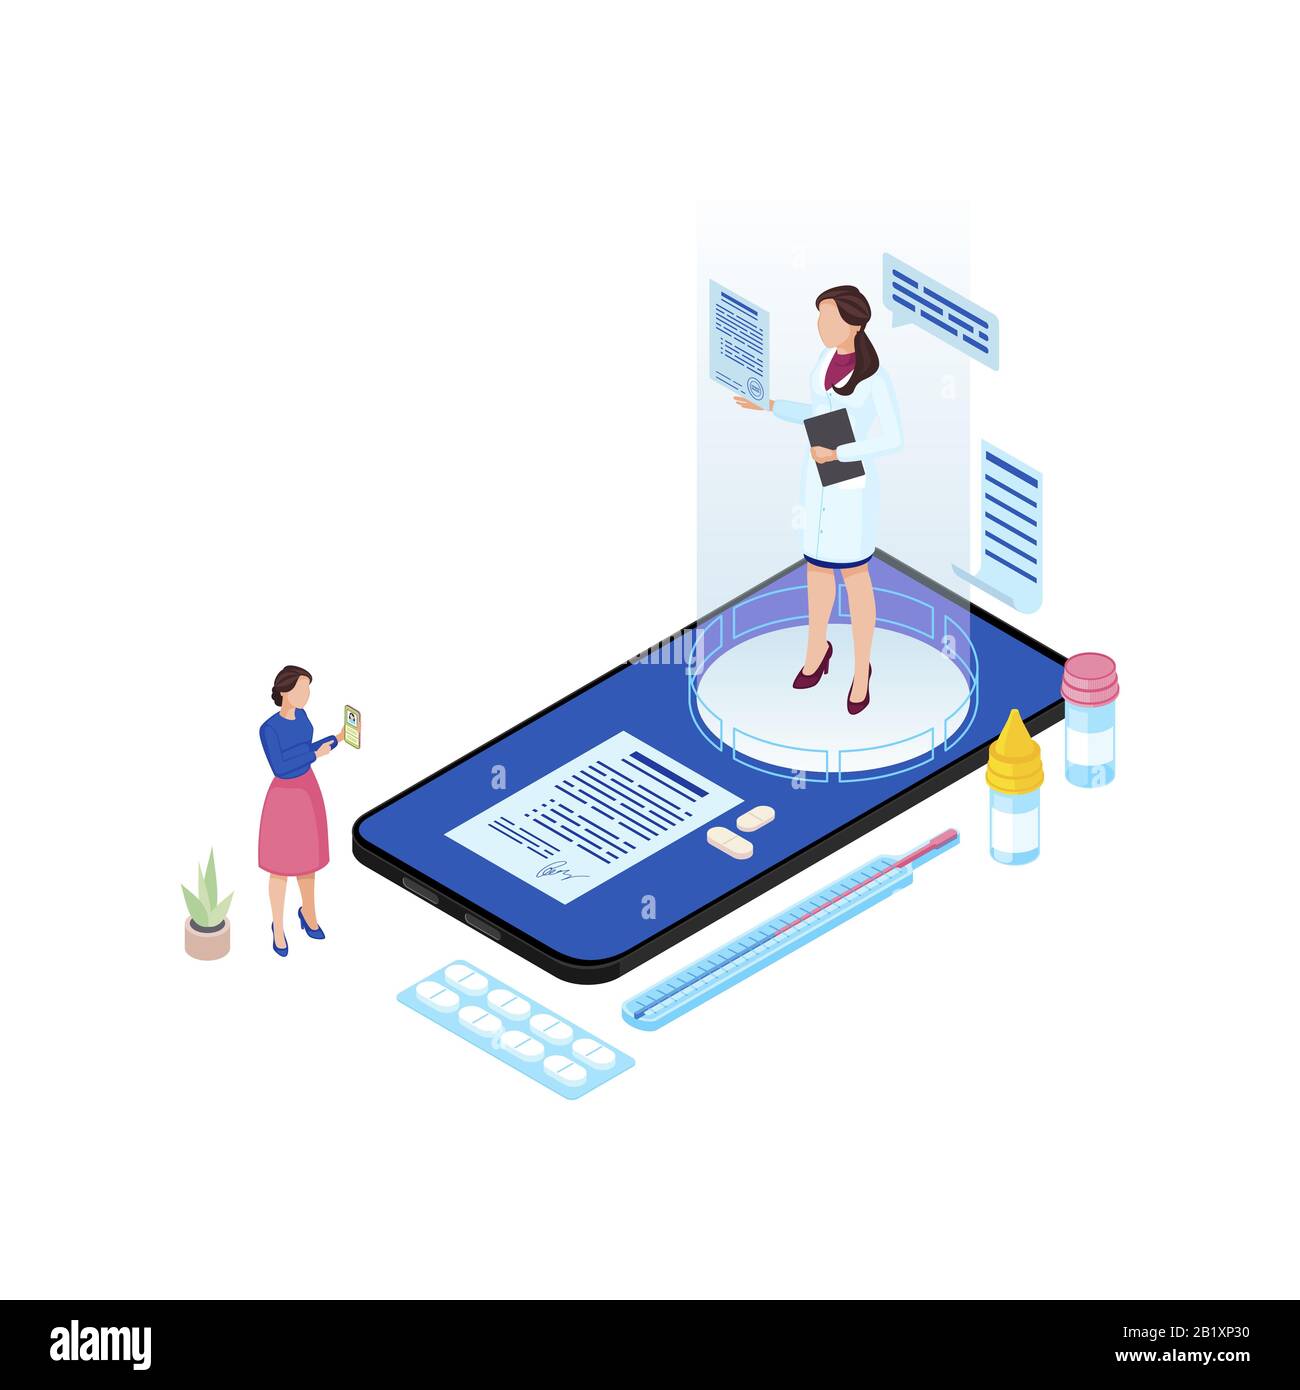 Online doctor appointment isometric illustration. Cartoon medical worker hologram prescribing pills, medication for patient isolated characters. Ill Stock Vector